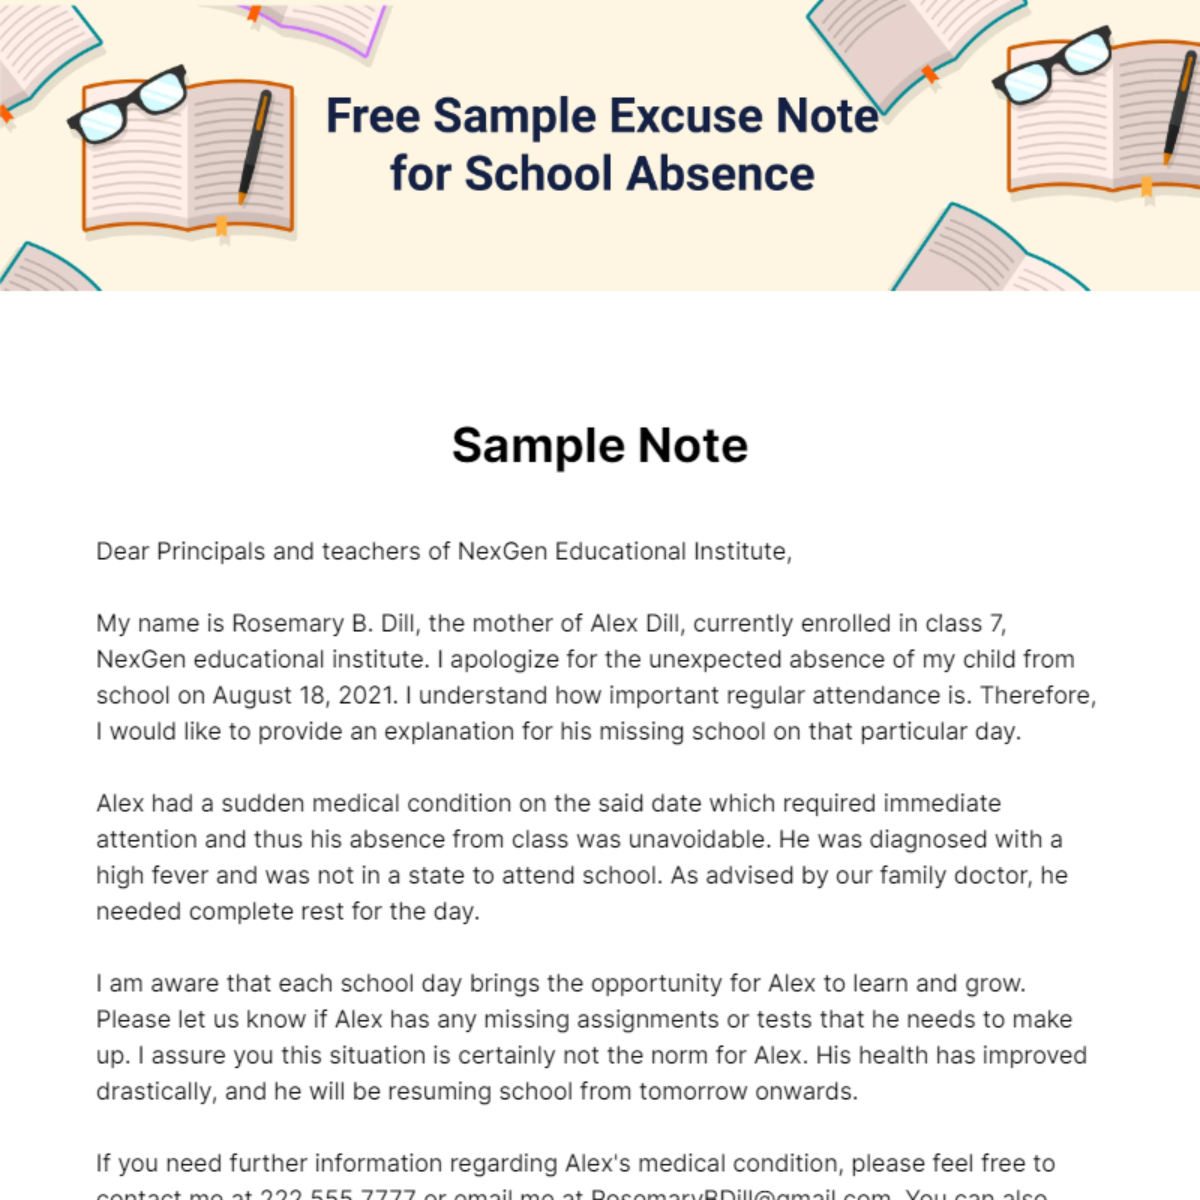 Free Sample Excuse Note for School Absence Template